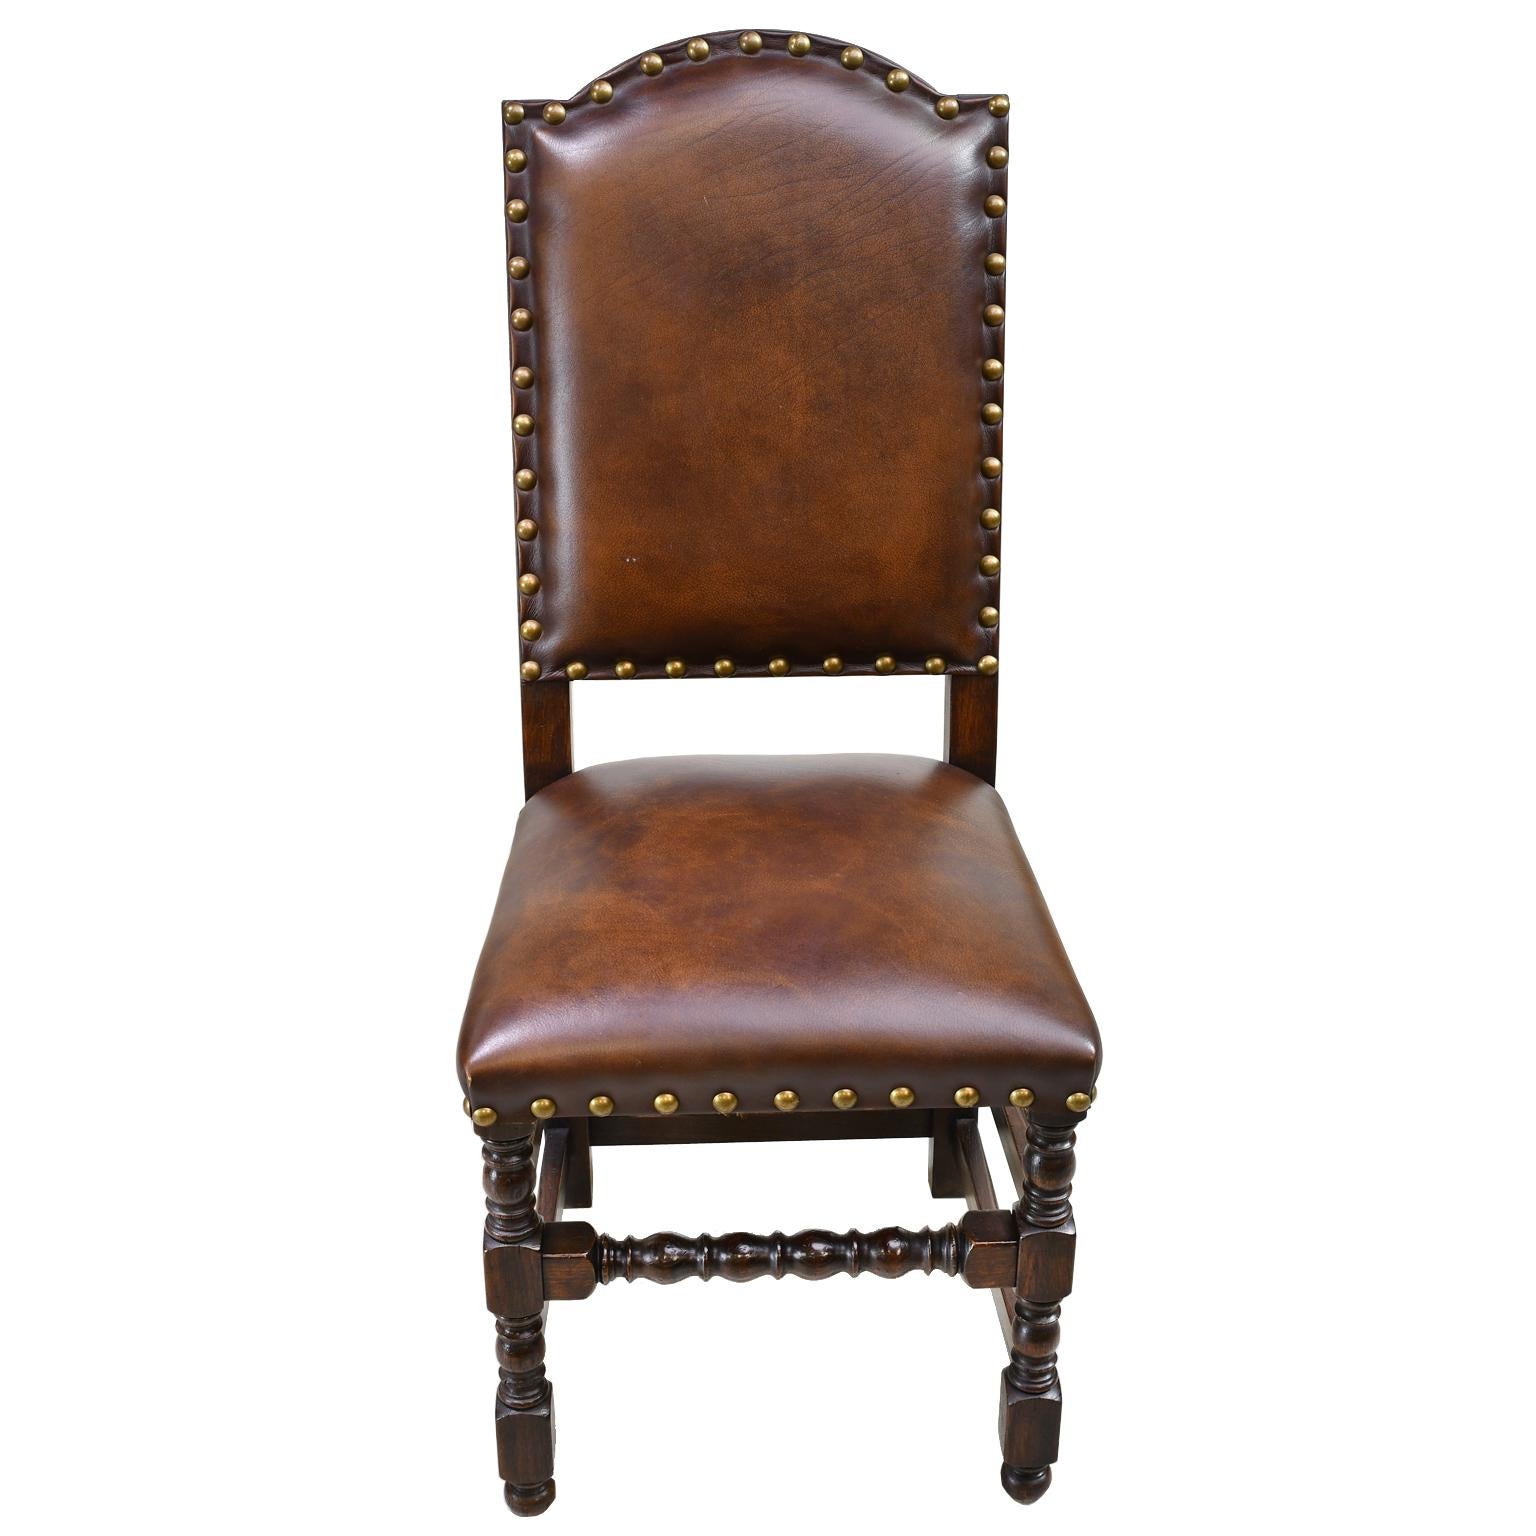 A well-crafted pair of Jacobean or Baroque style dining chairs with dark oak frames with expresso coffee-colored leather upholstery on arched back and seat trimmed with decorative brass nail heads, circa 2000. Chairs are supported on turned front